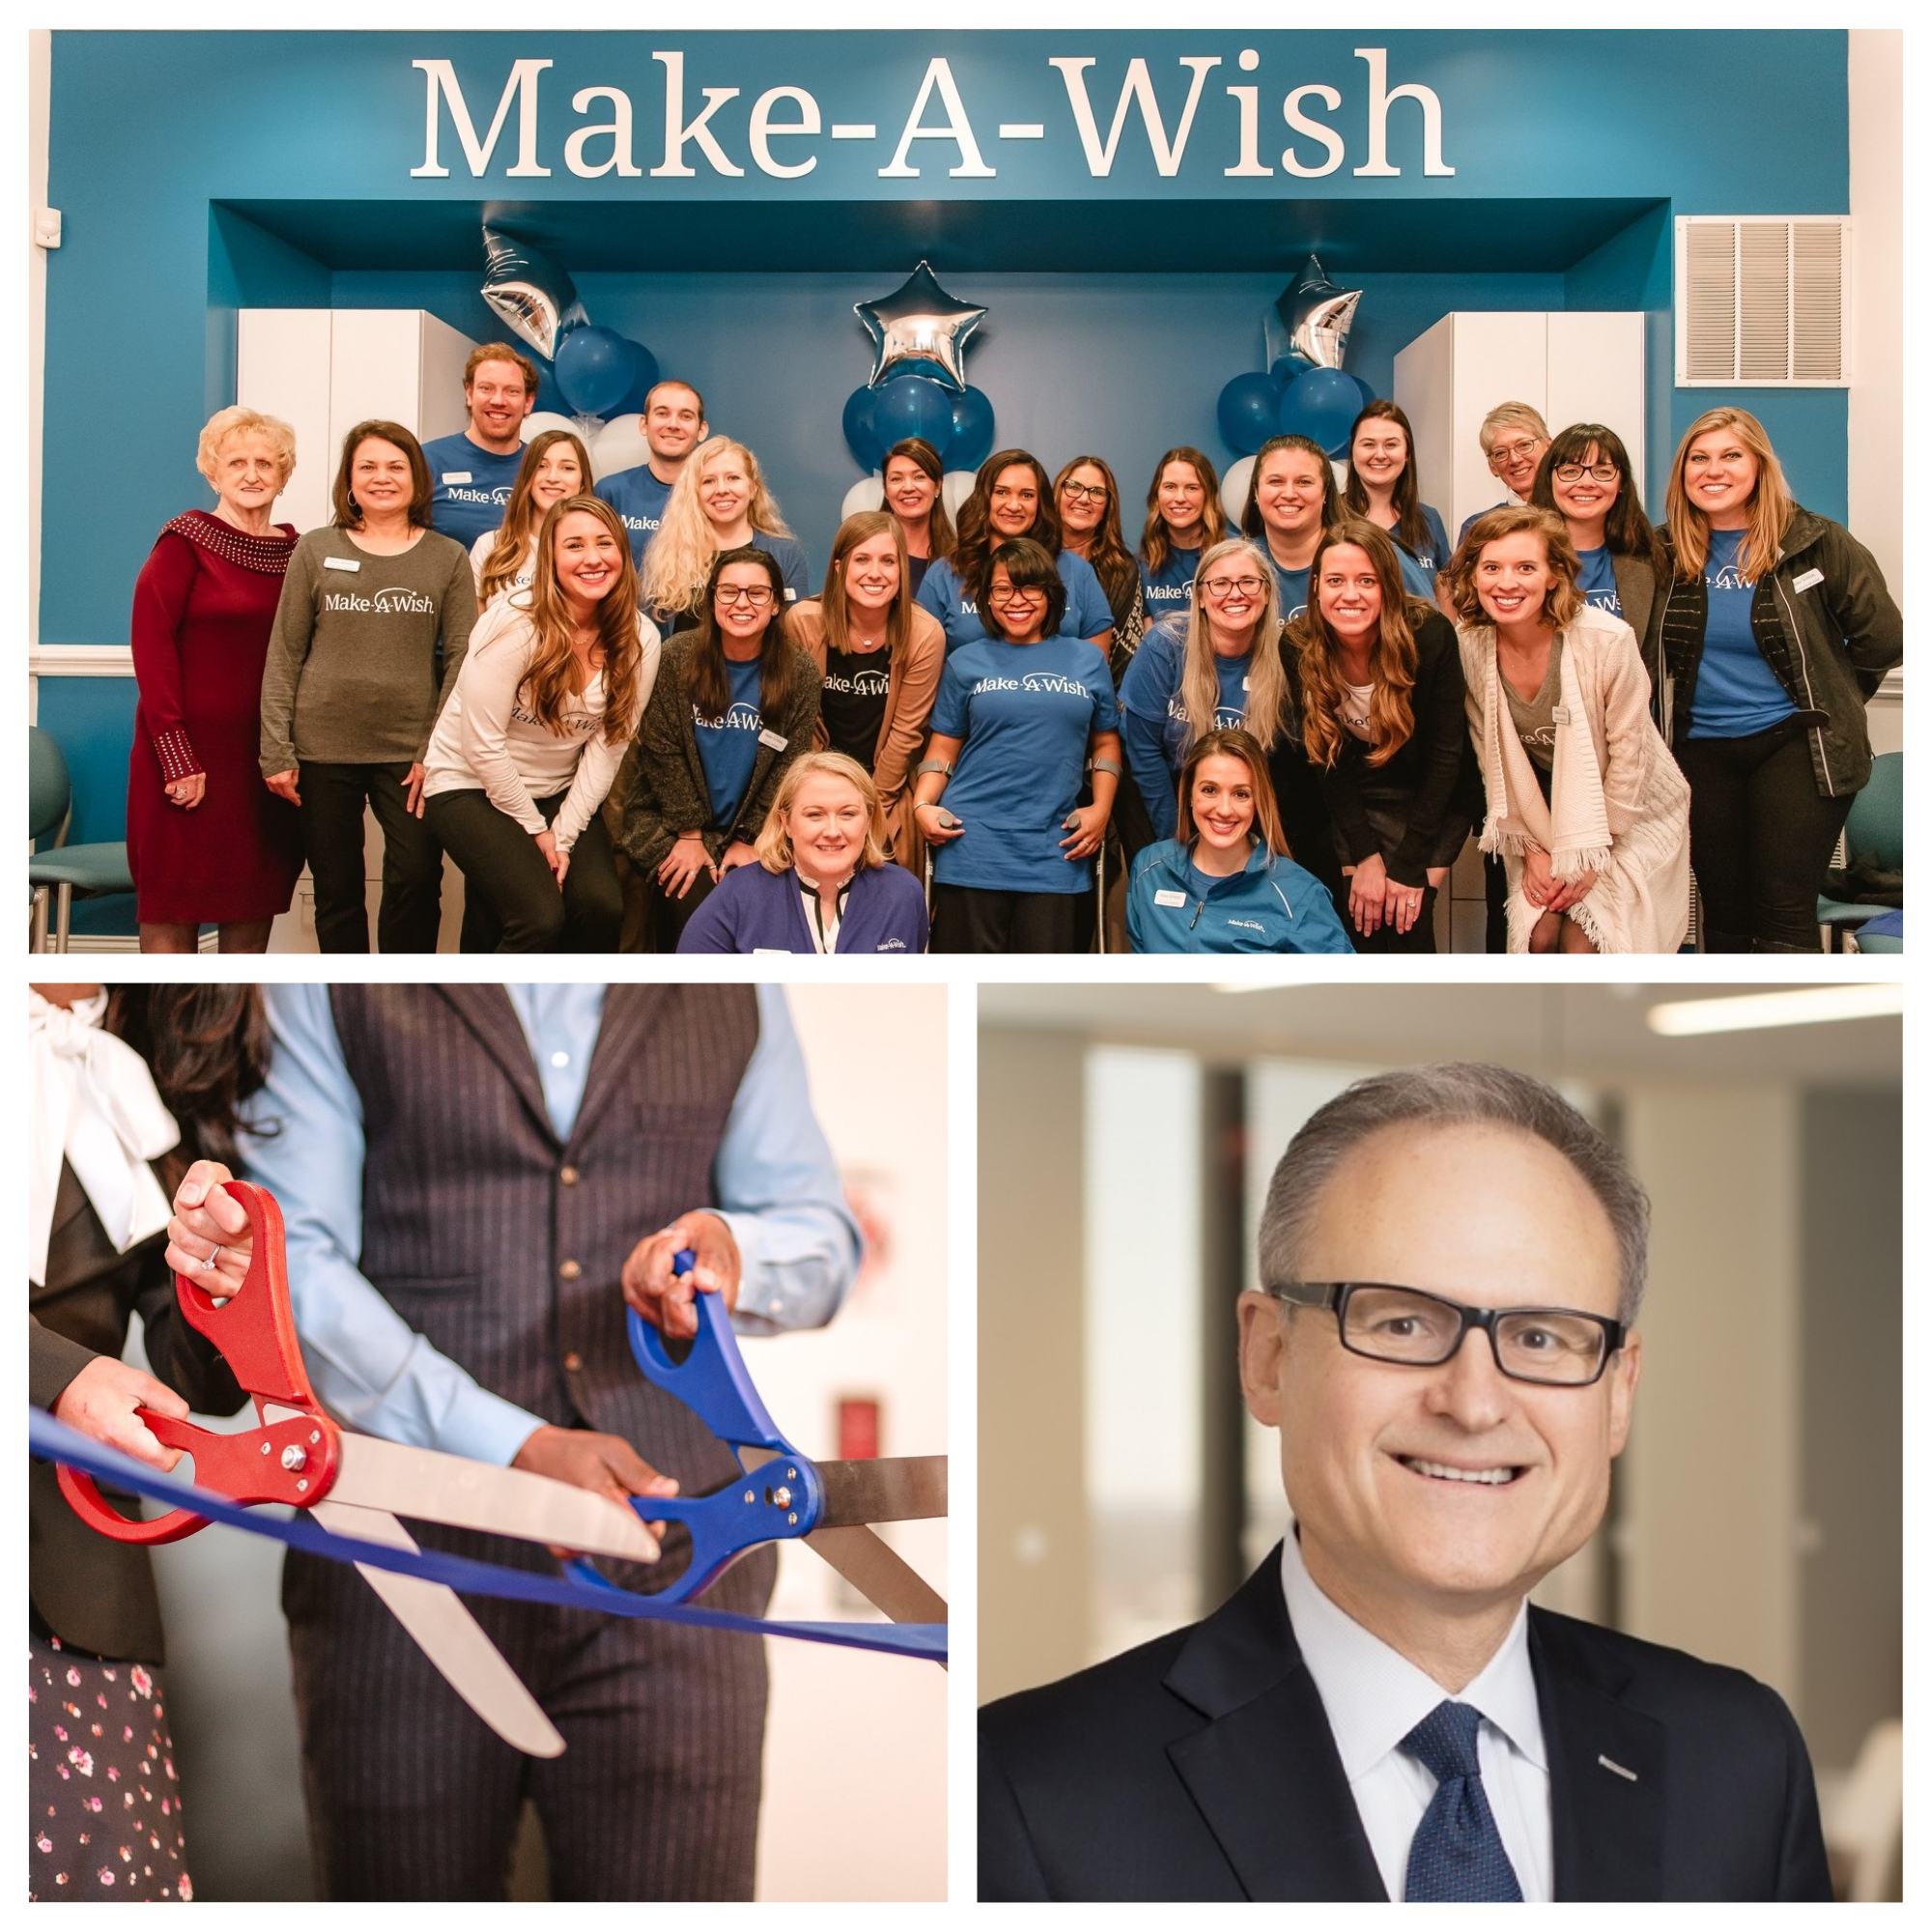 Moses Luski Assists Make-A-Wish Foundation of Central and Western North Carolina, Inc.